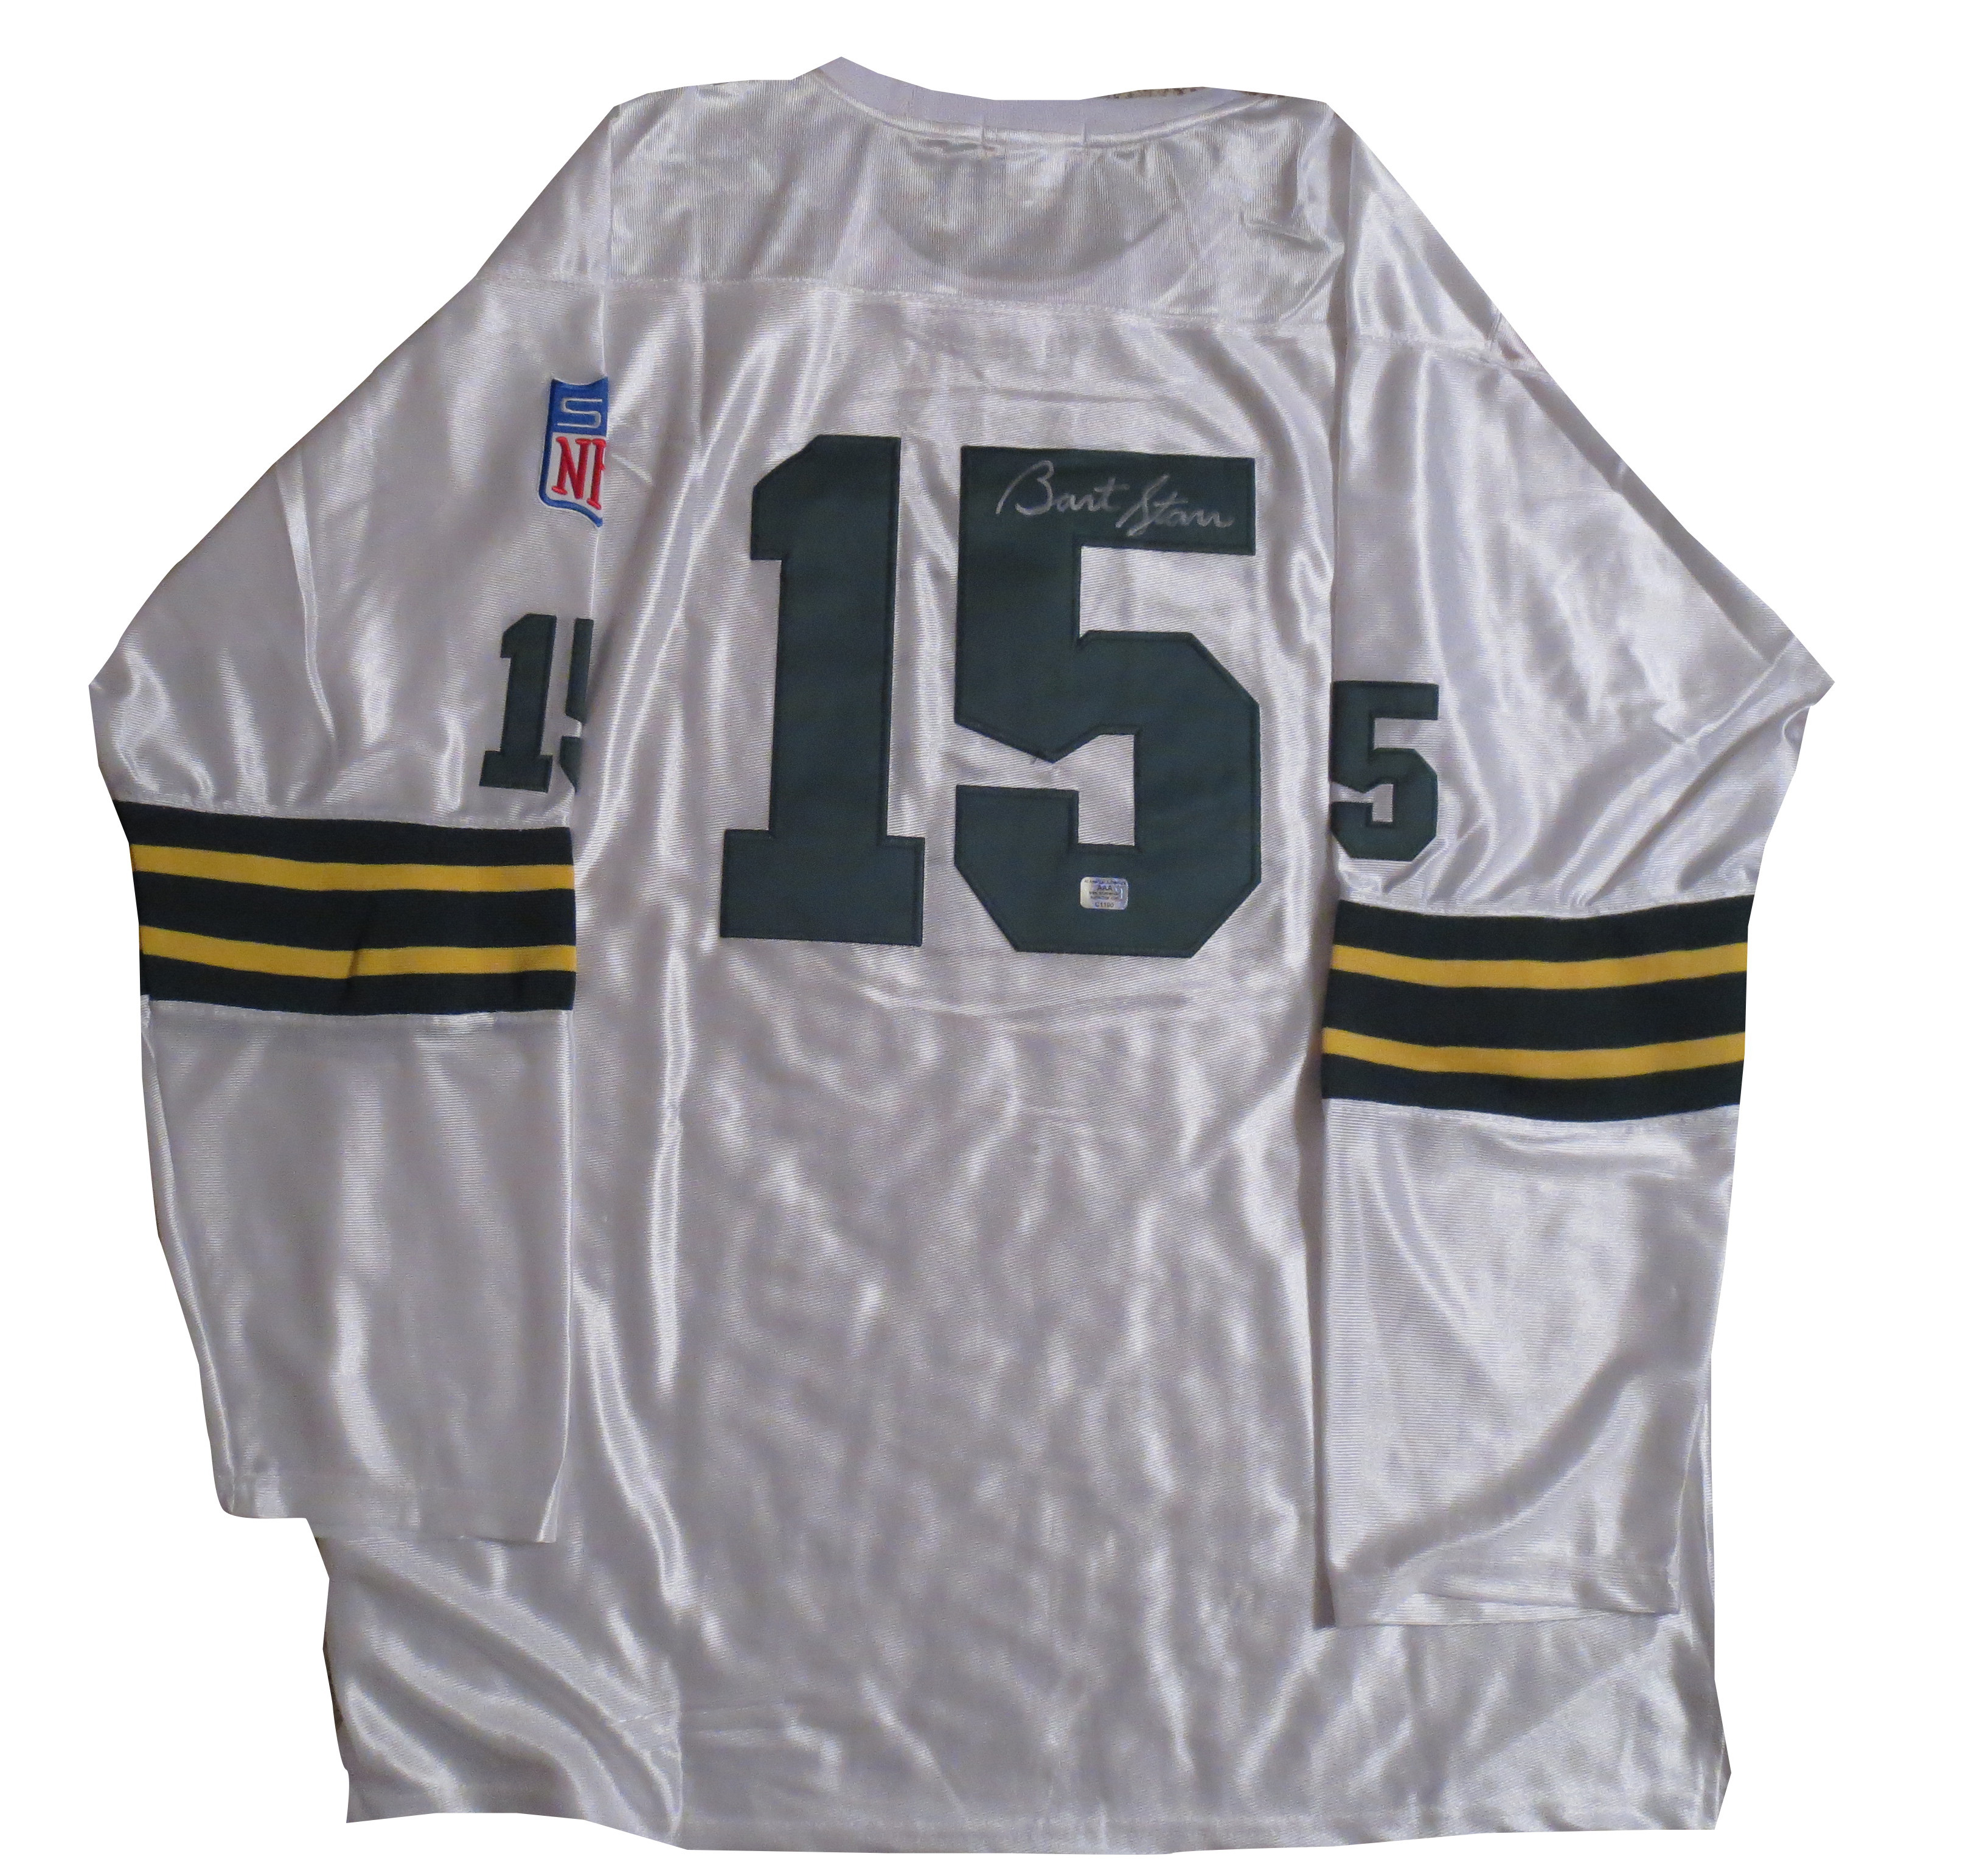 bart starr signed jersey